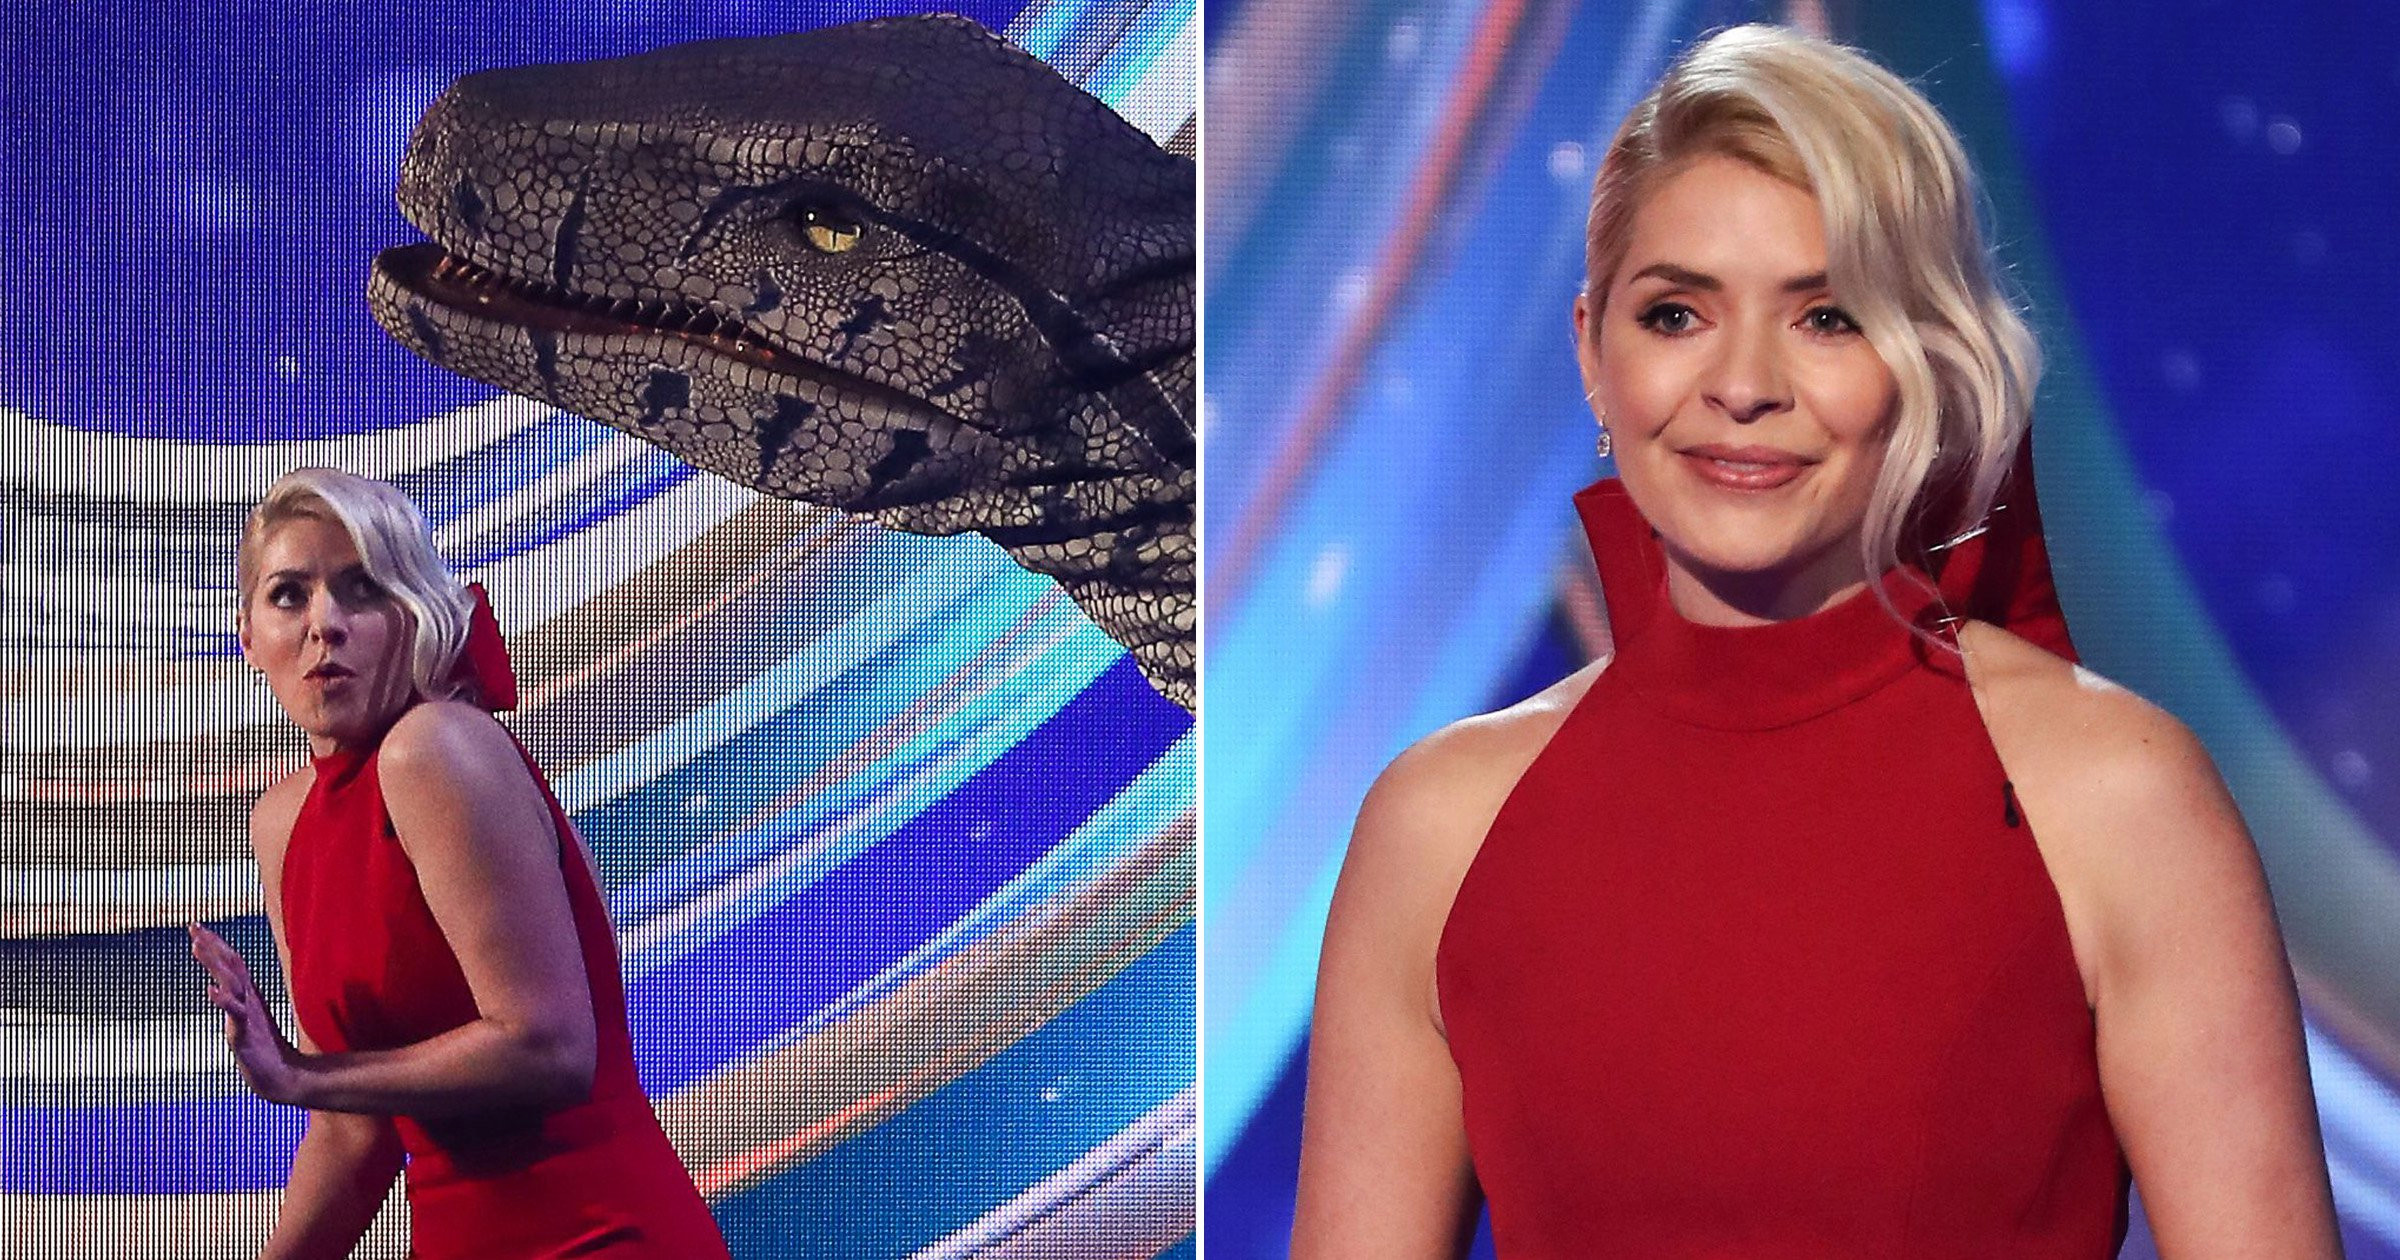 Dancing on Ice 2021: Phillip Schofield in hysterics after Holly Willoughby is ‘attacked’ by dinosaur